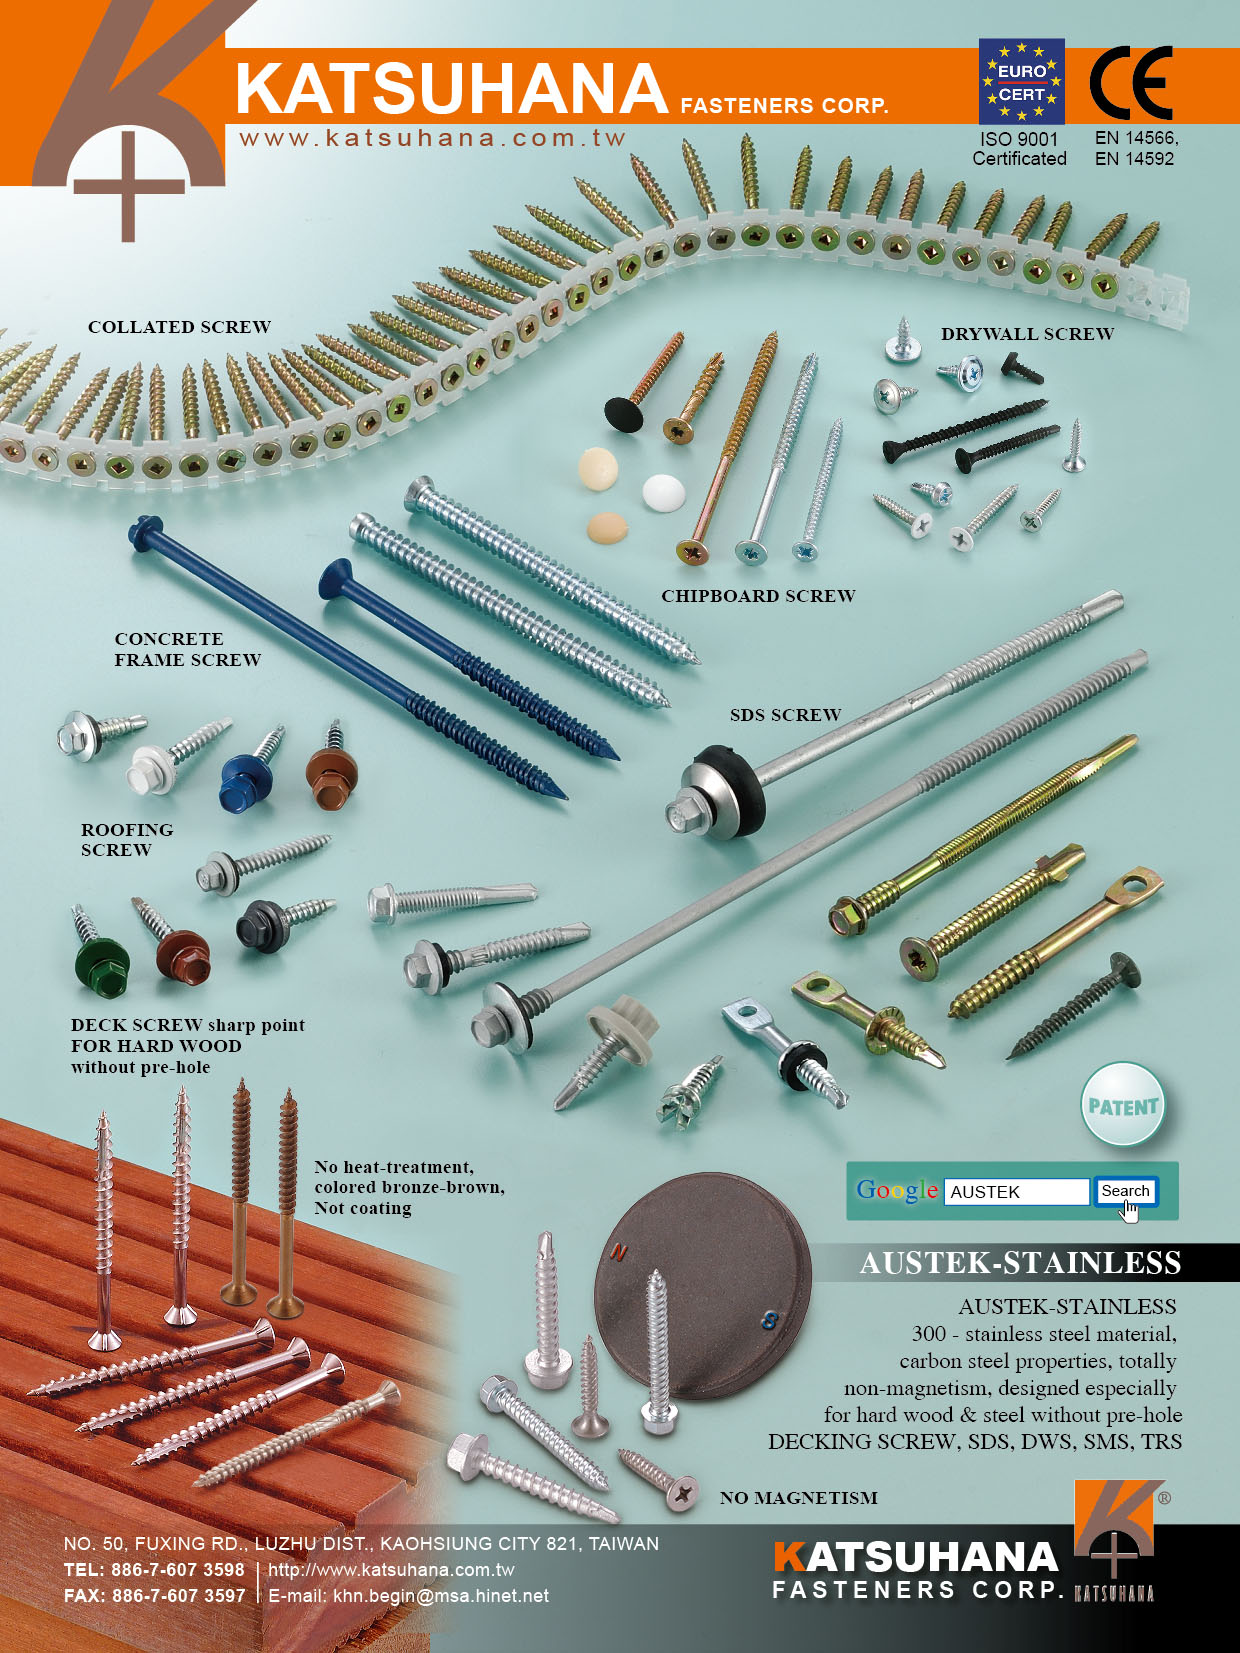 Chipboard Screws COLLATED SCREW,CONCRETE SCREW,ROOFING SCREW,DECK SCREW SHARP POINT FOR HARD WOOD WITHOUT PRE-HOLE,DRYWALL SCREW,CHIPBOARD SCREW,SDS SCREW